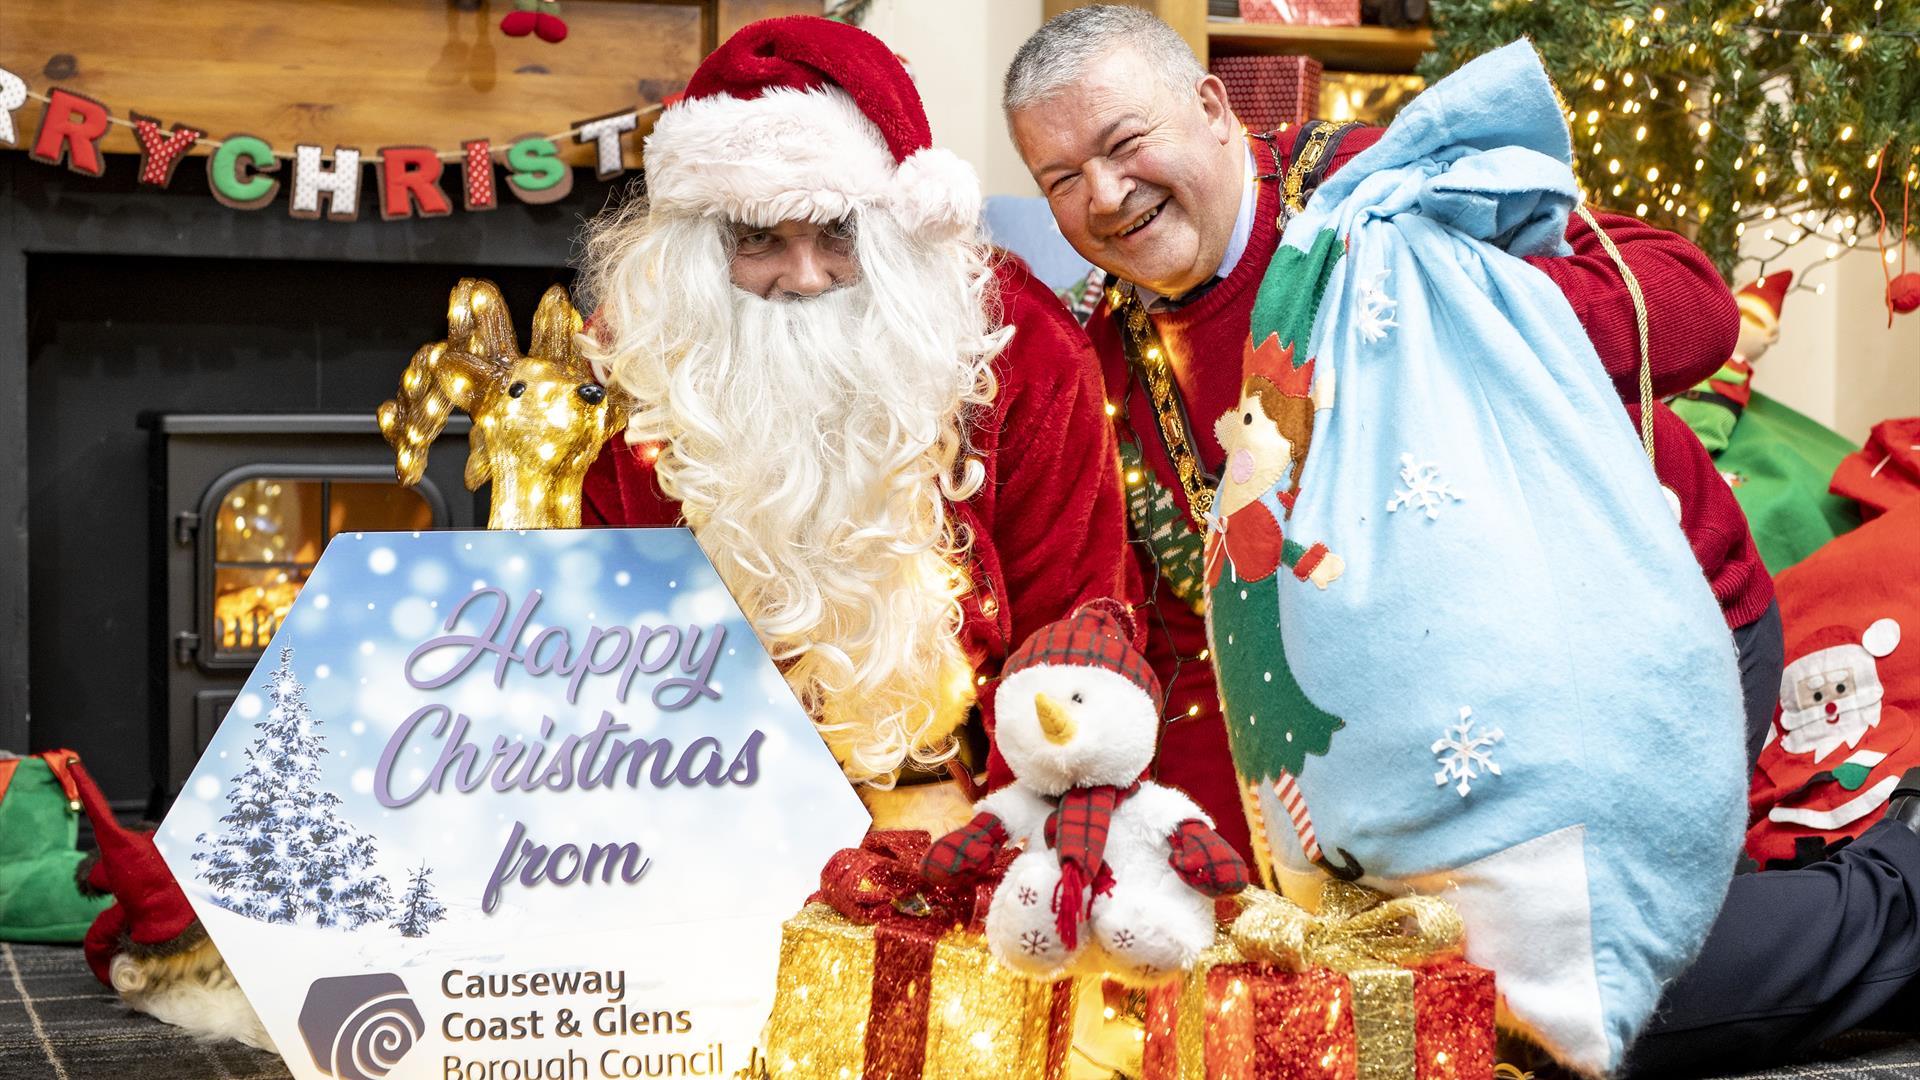 The Mayor Ivor Wallace sitting beside Santa with a blue sack, light up present and a sign reading 'Happy Christmas from Causeway Coast and Glens Borou